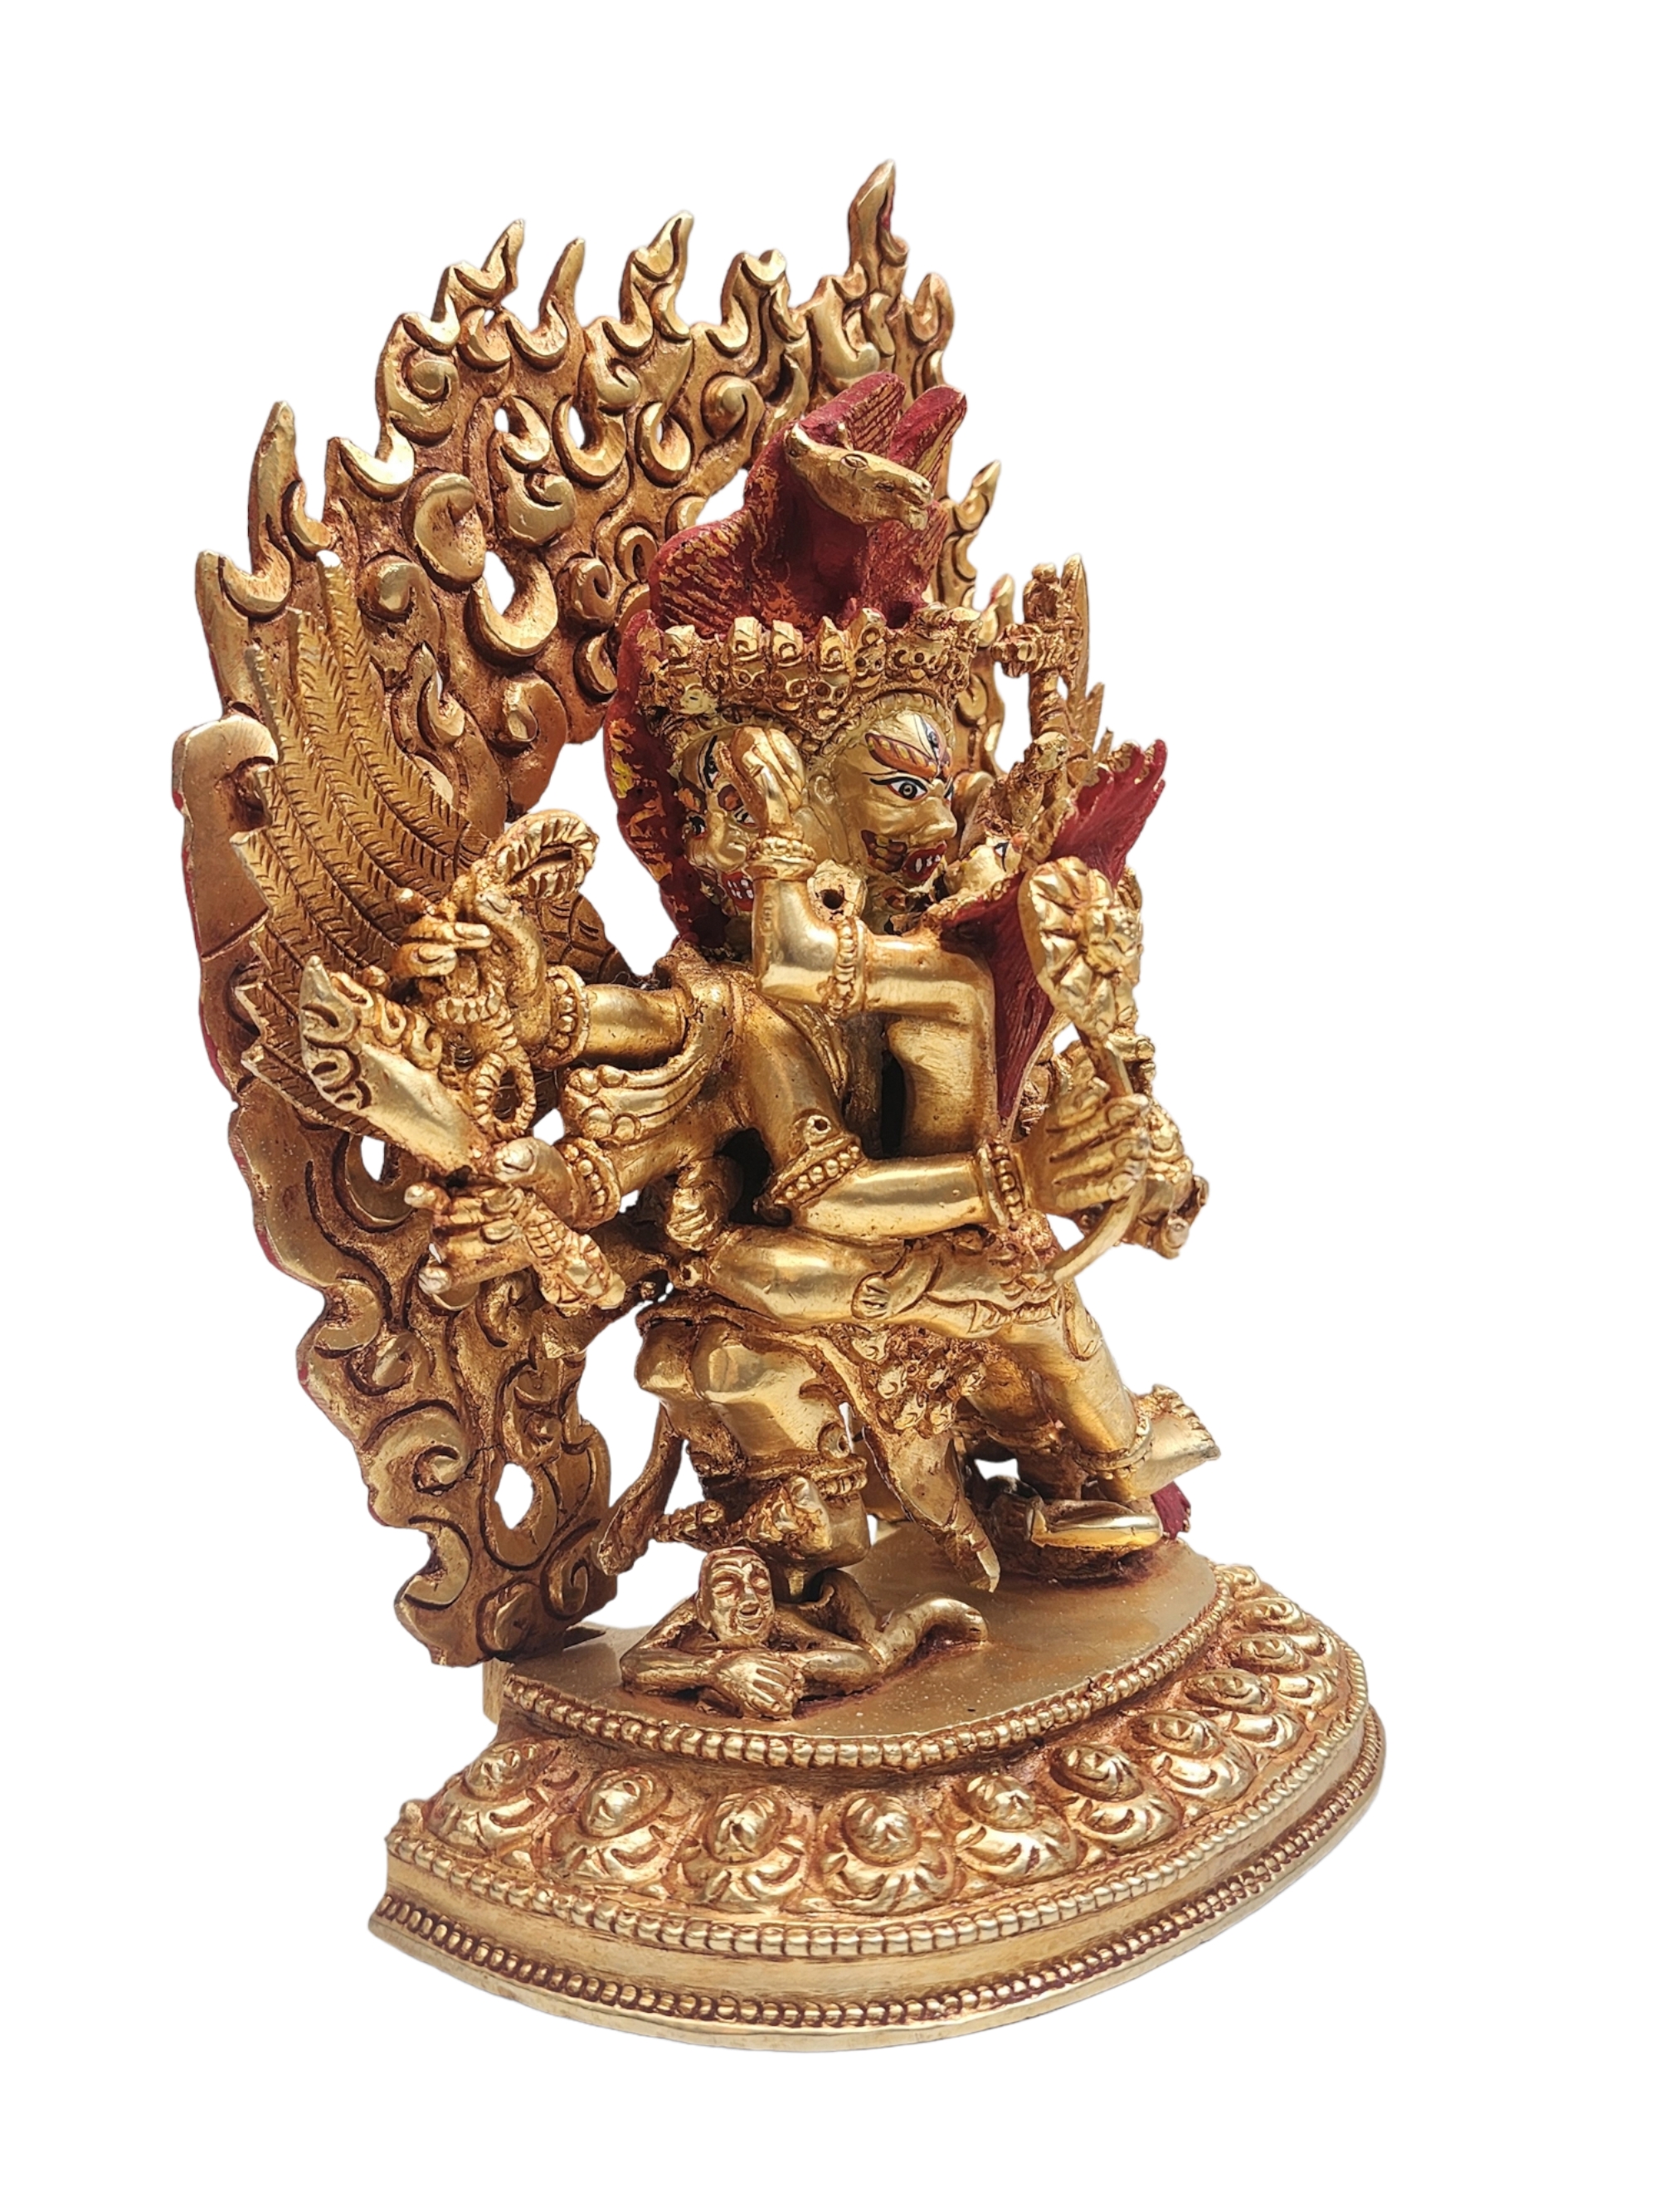 Buddhist Statue Of hayagriva, With Full Gold Plated And Painted Face